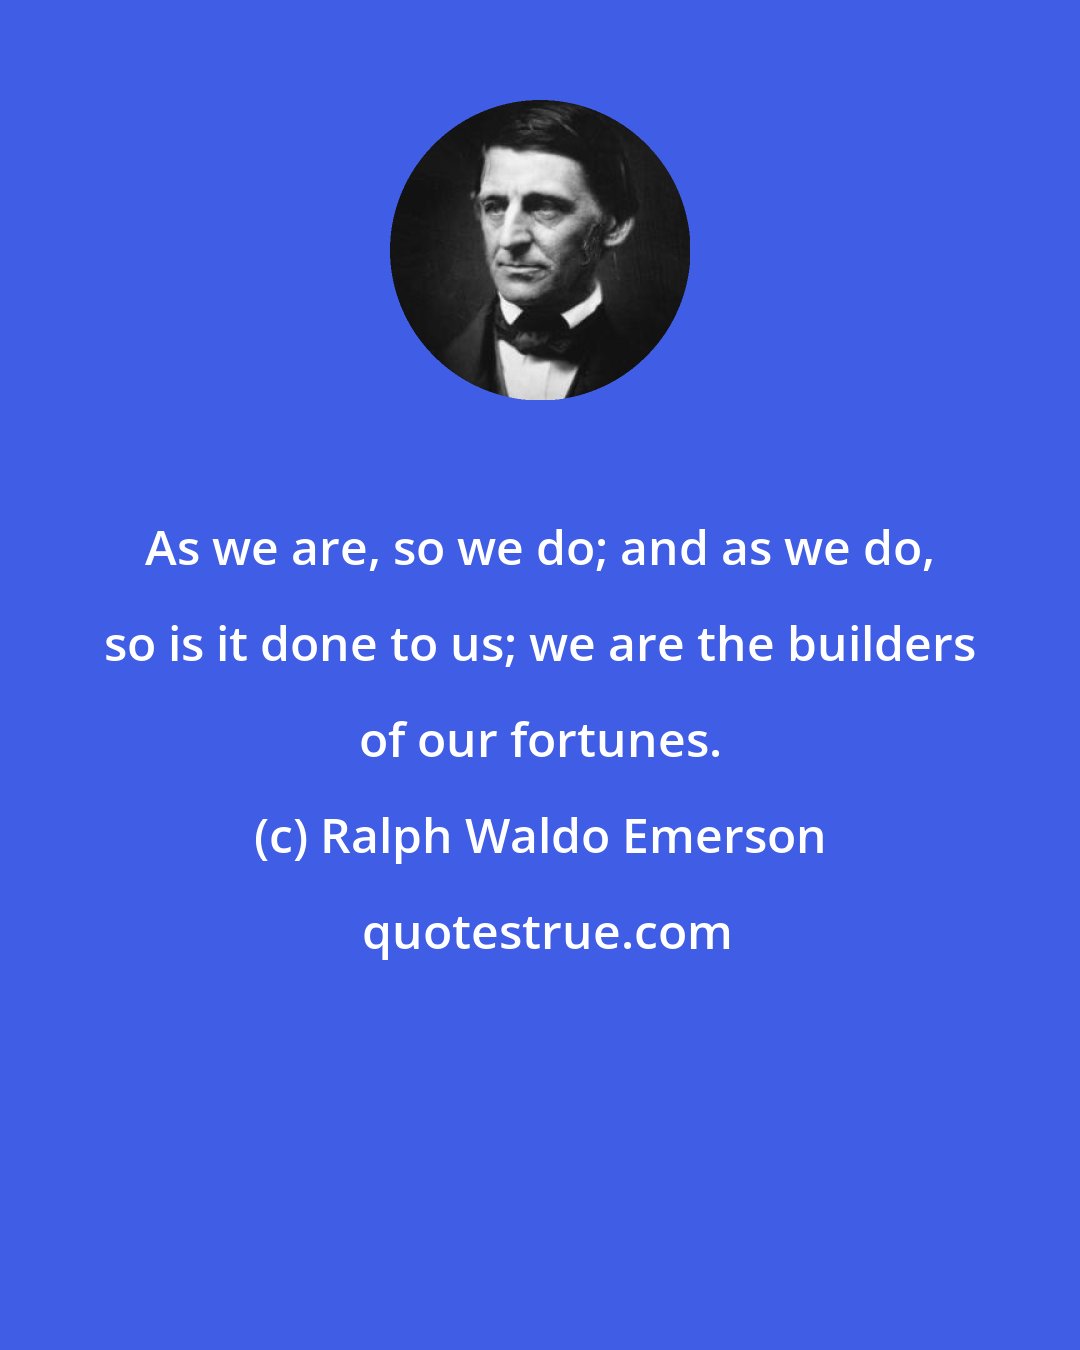 Ralph Waldo Emerson: As we are, so we do; and as we do, so is it done to us; we are the builders of our fortunes.